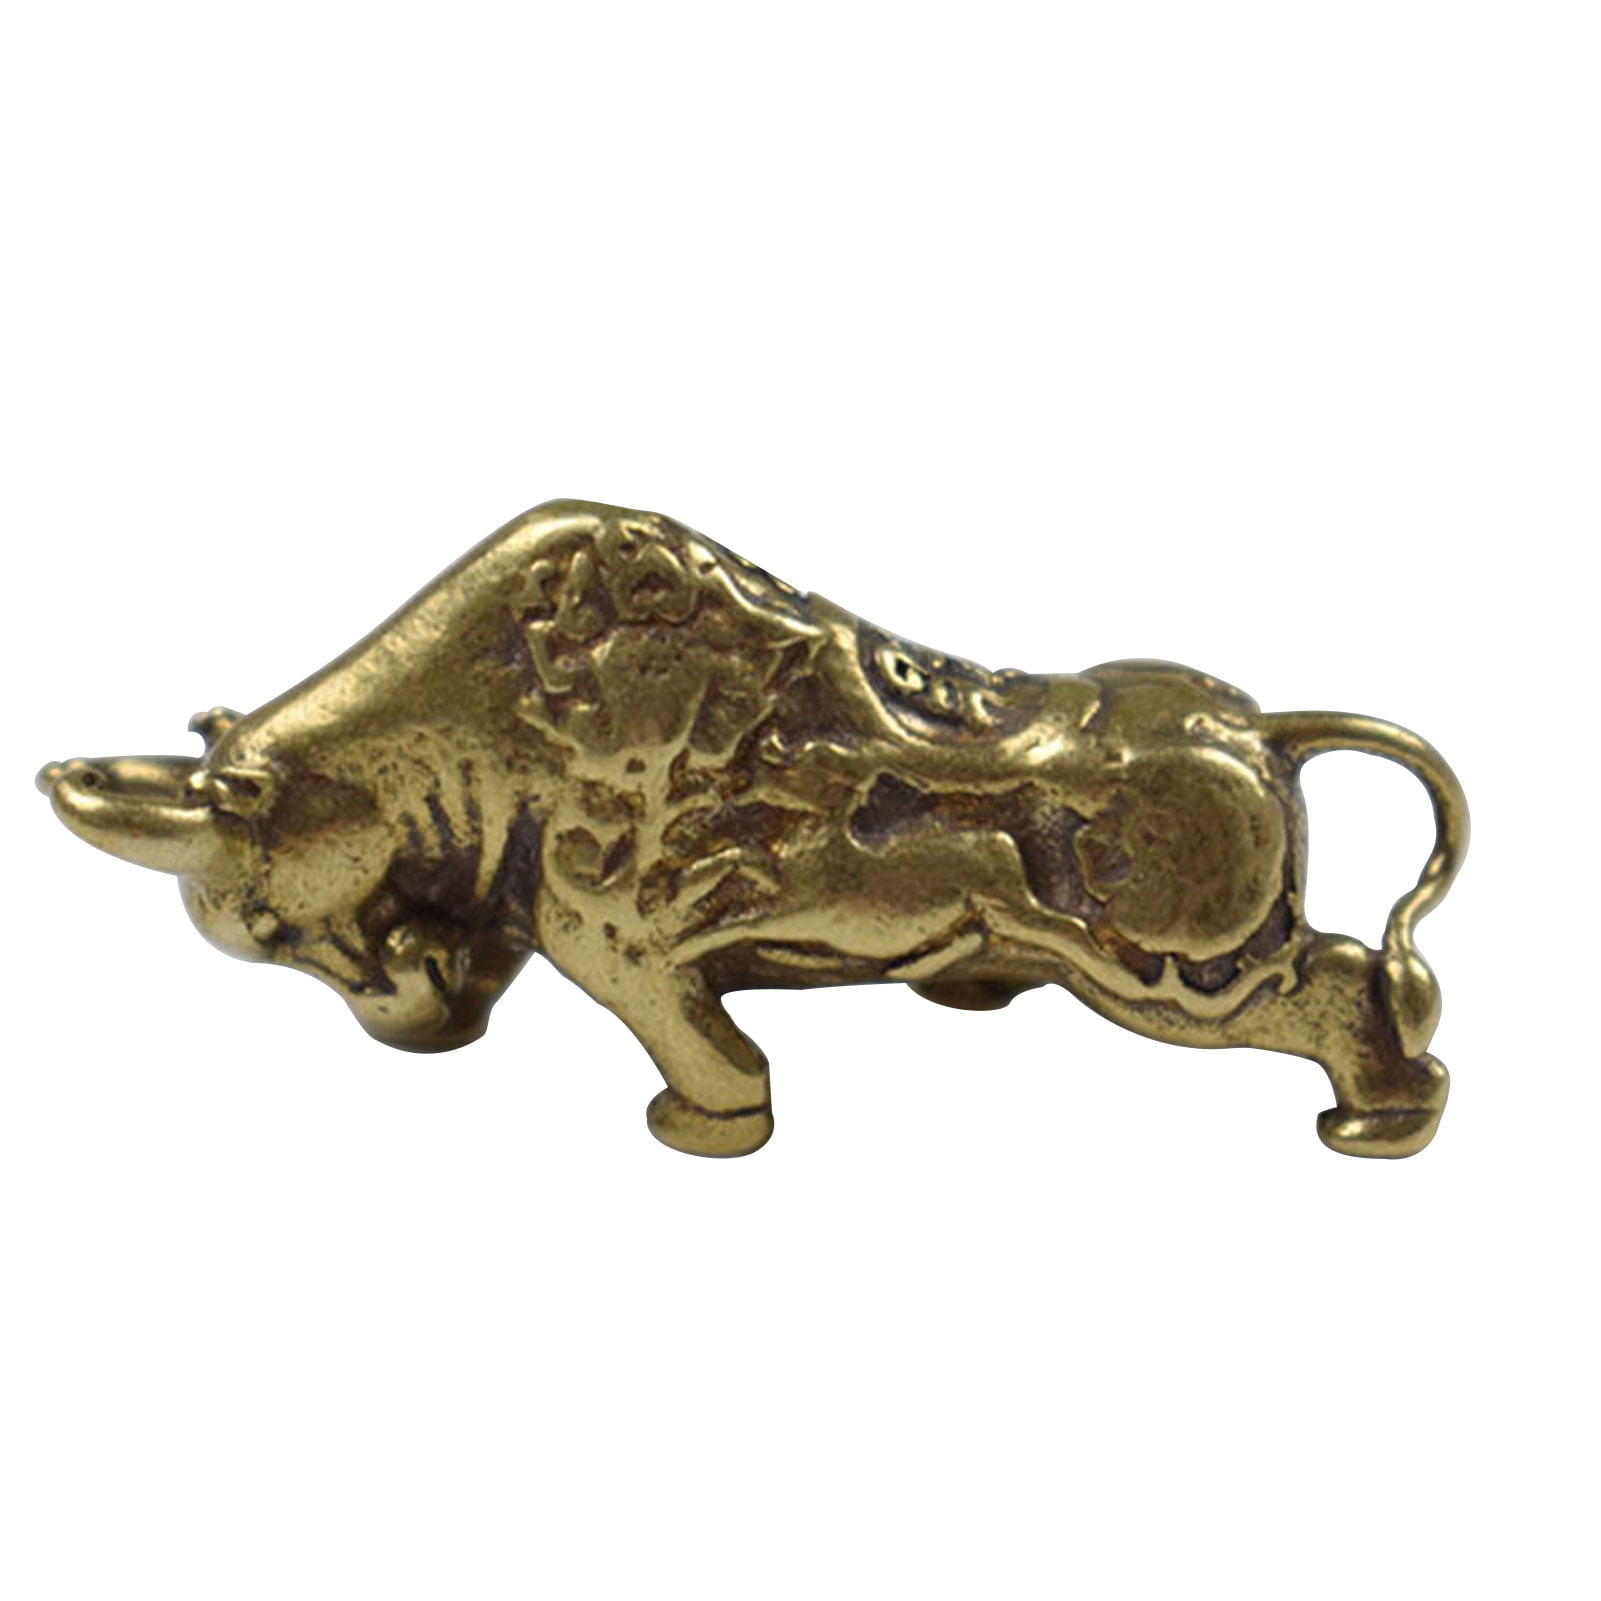 New Year of the Ox Bull Ornament Figurine Miniature Statue Display Home Desk 